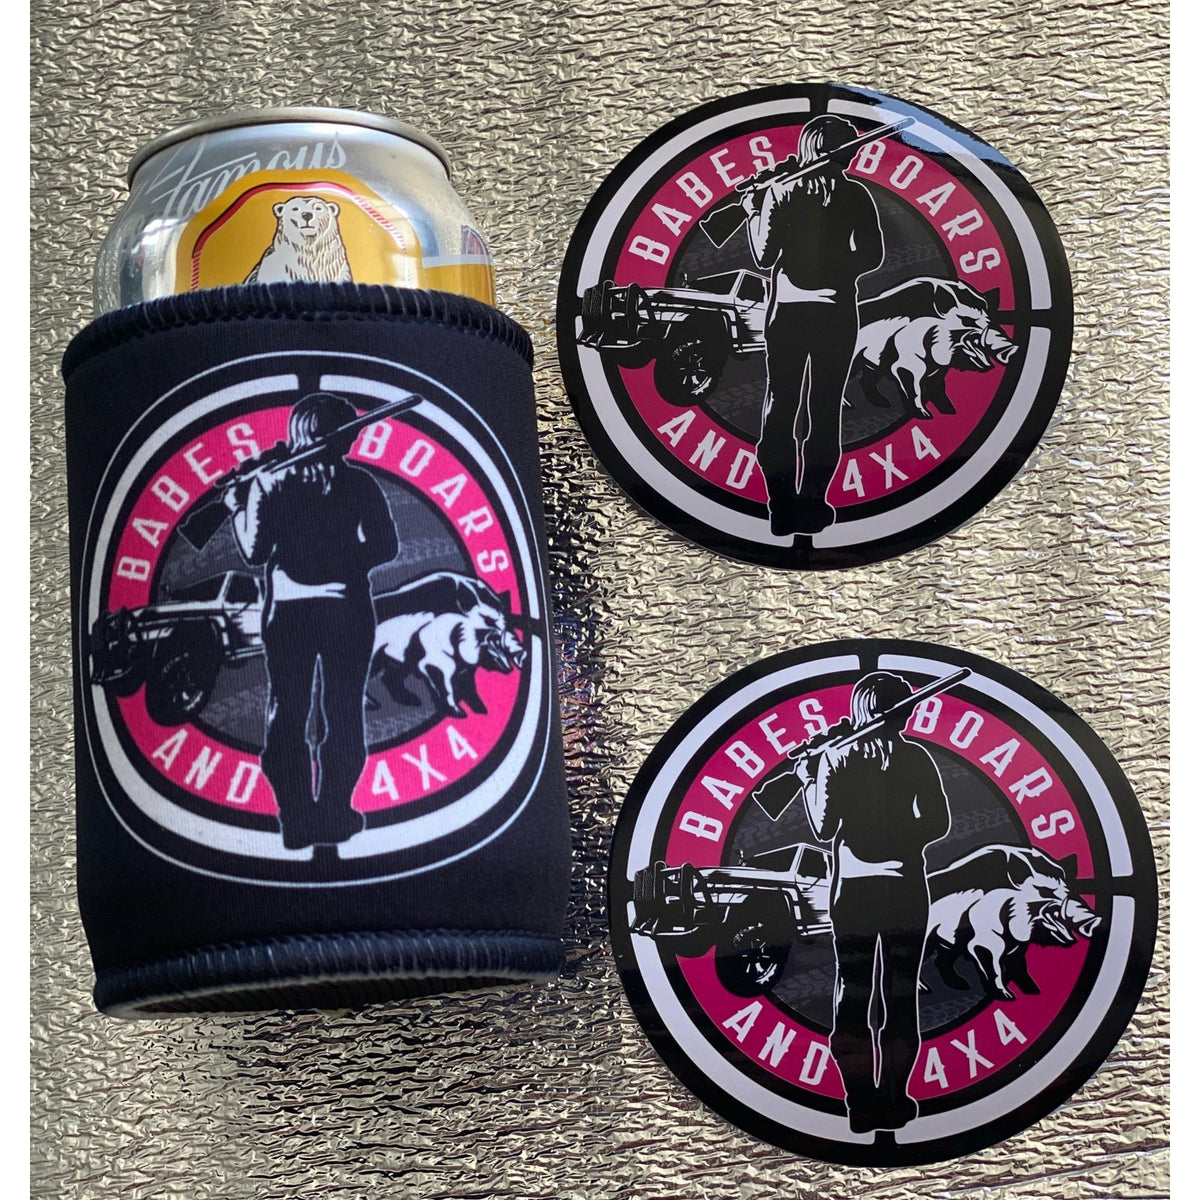 BABES BOARS & 4X4 STICKER & COOLER PACK